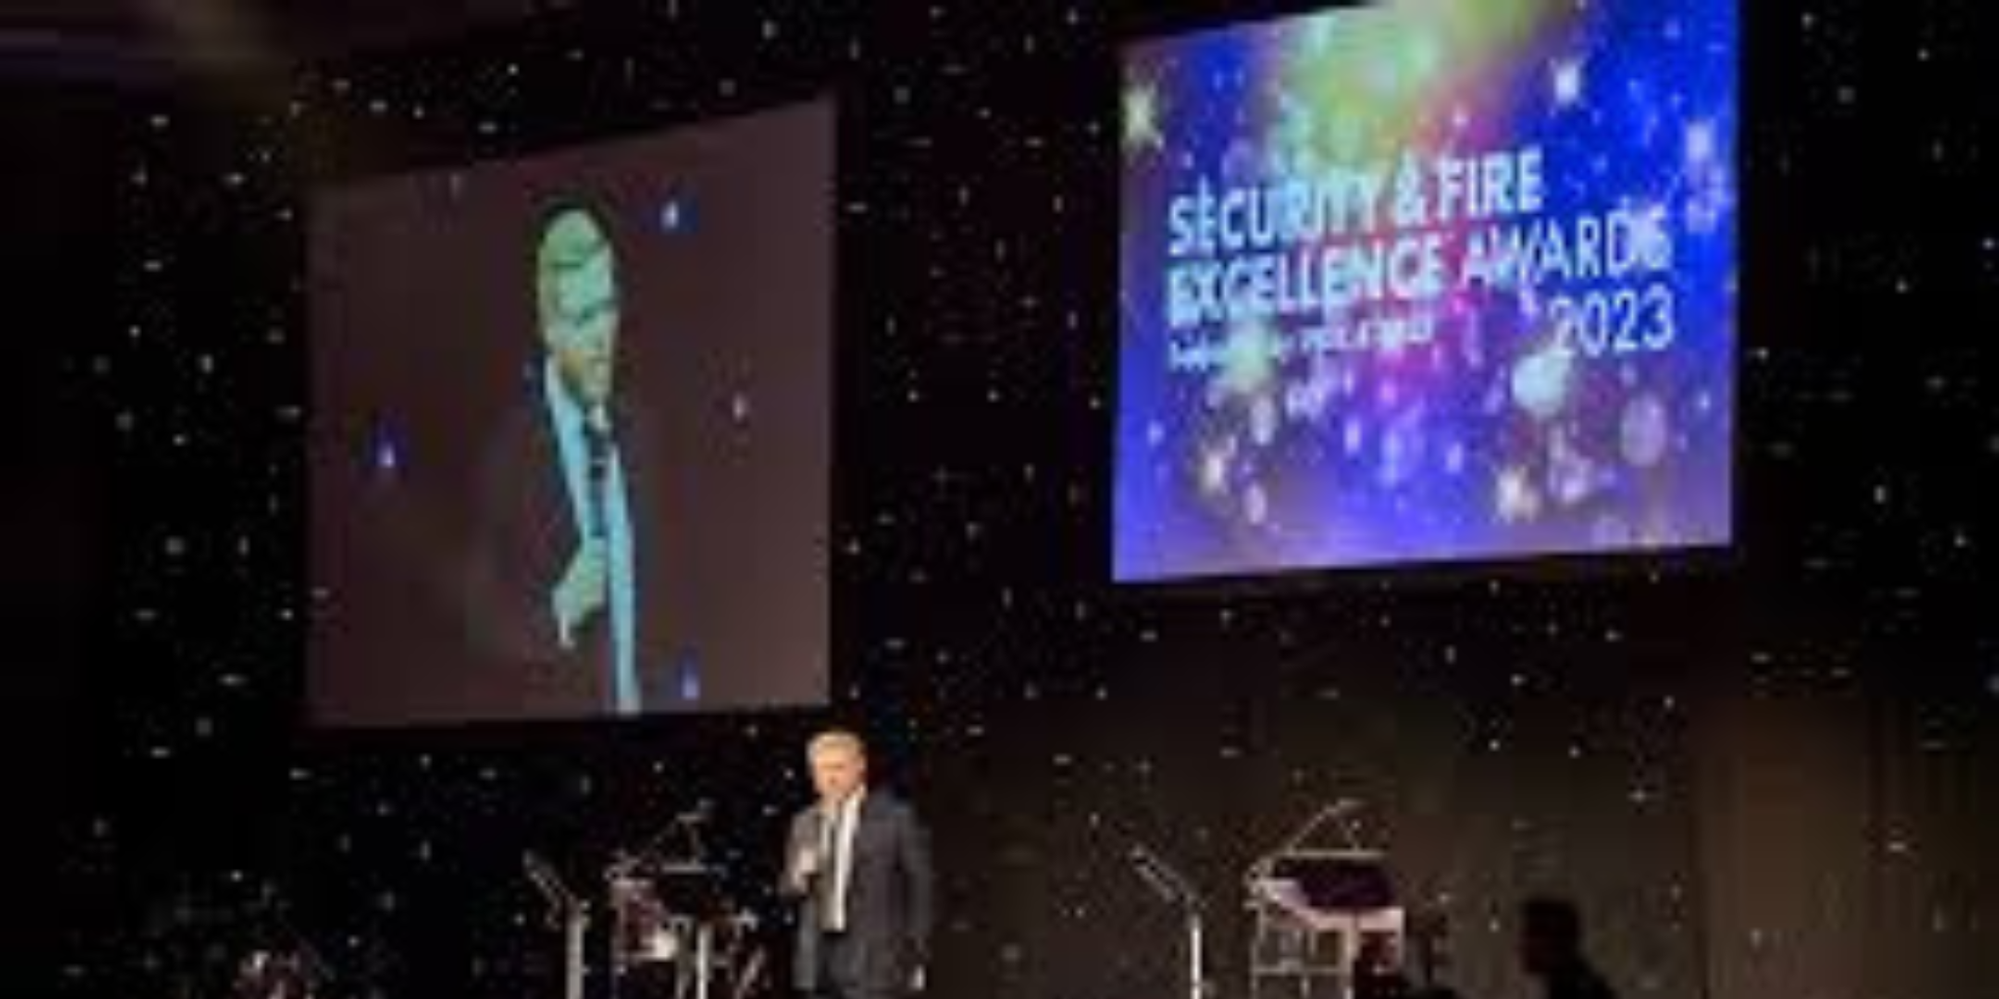 Security & Fire Excellence Awards 2023 announced